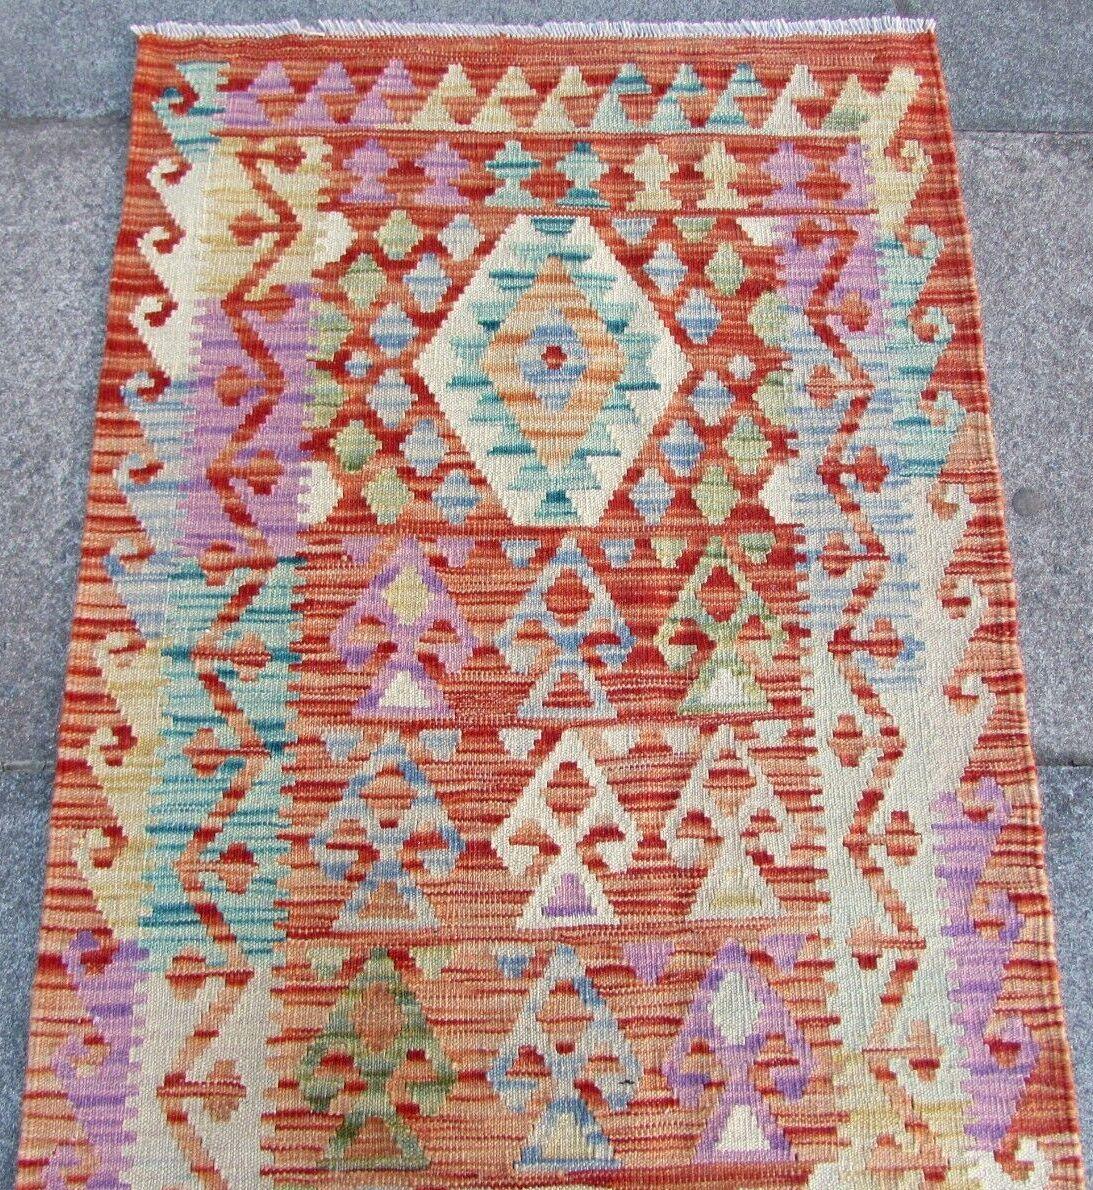 This handmade vintage Afghan kilim runner from the 1980s is a stunning piece of art. The runner measures 2.5 feet wide by 6.5 feet long (77cm x 199cm), making it the perfect size for a hallway, foyer or any narrow space in your home.

Crafted from